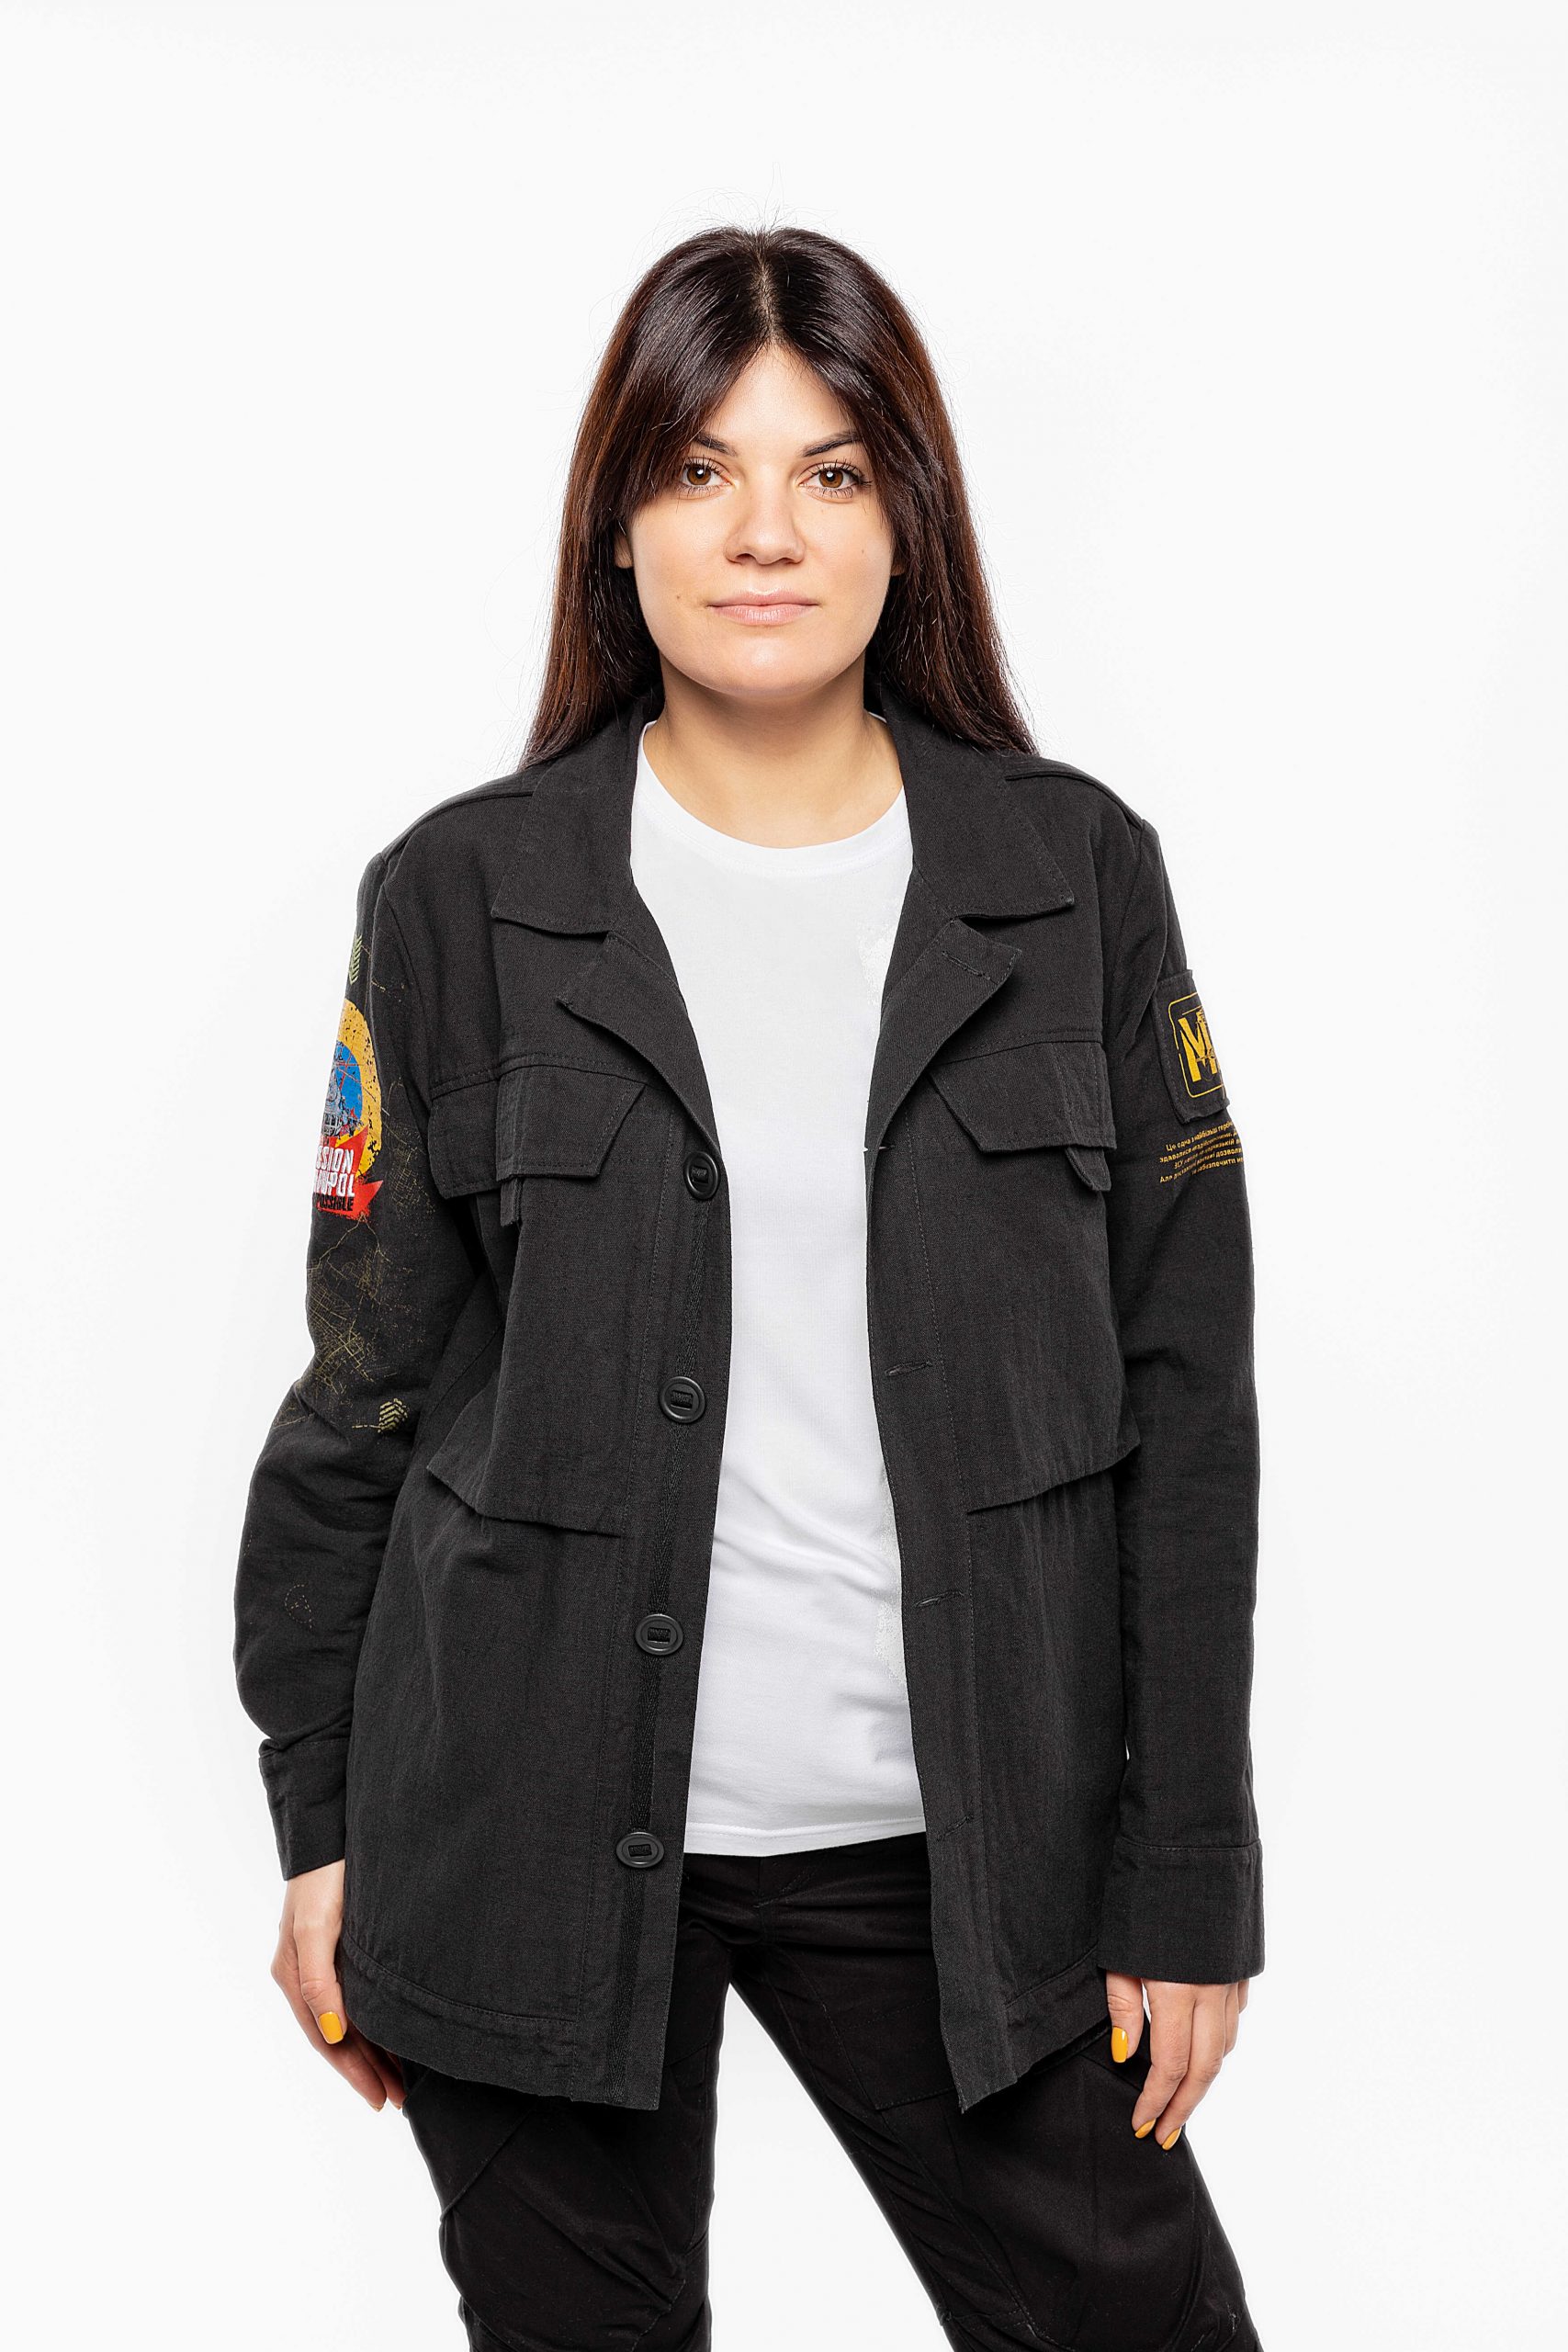 Women's Shirt-Jacket Mission Mariupol. Color black. Part of the profit is transferred to the families of heroes killed in the mission, so the product does not participate in promotions and bonuses are not accrued from it.